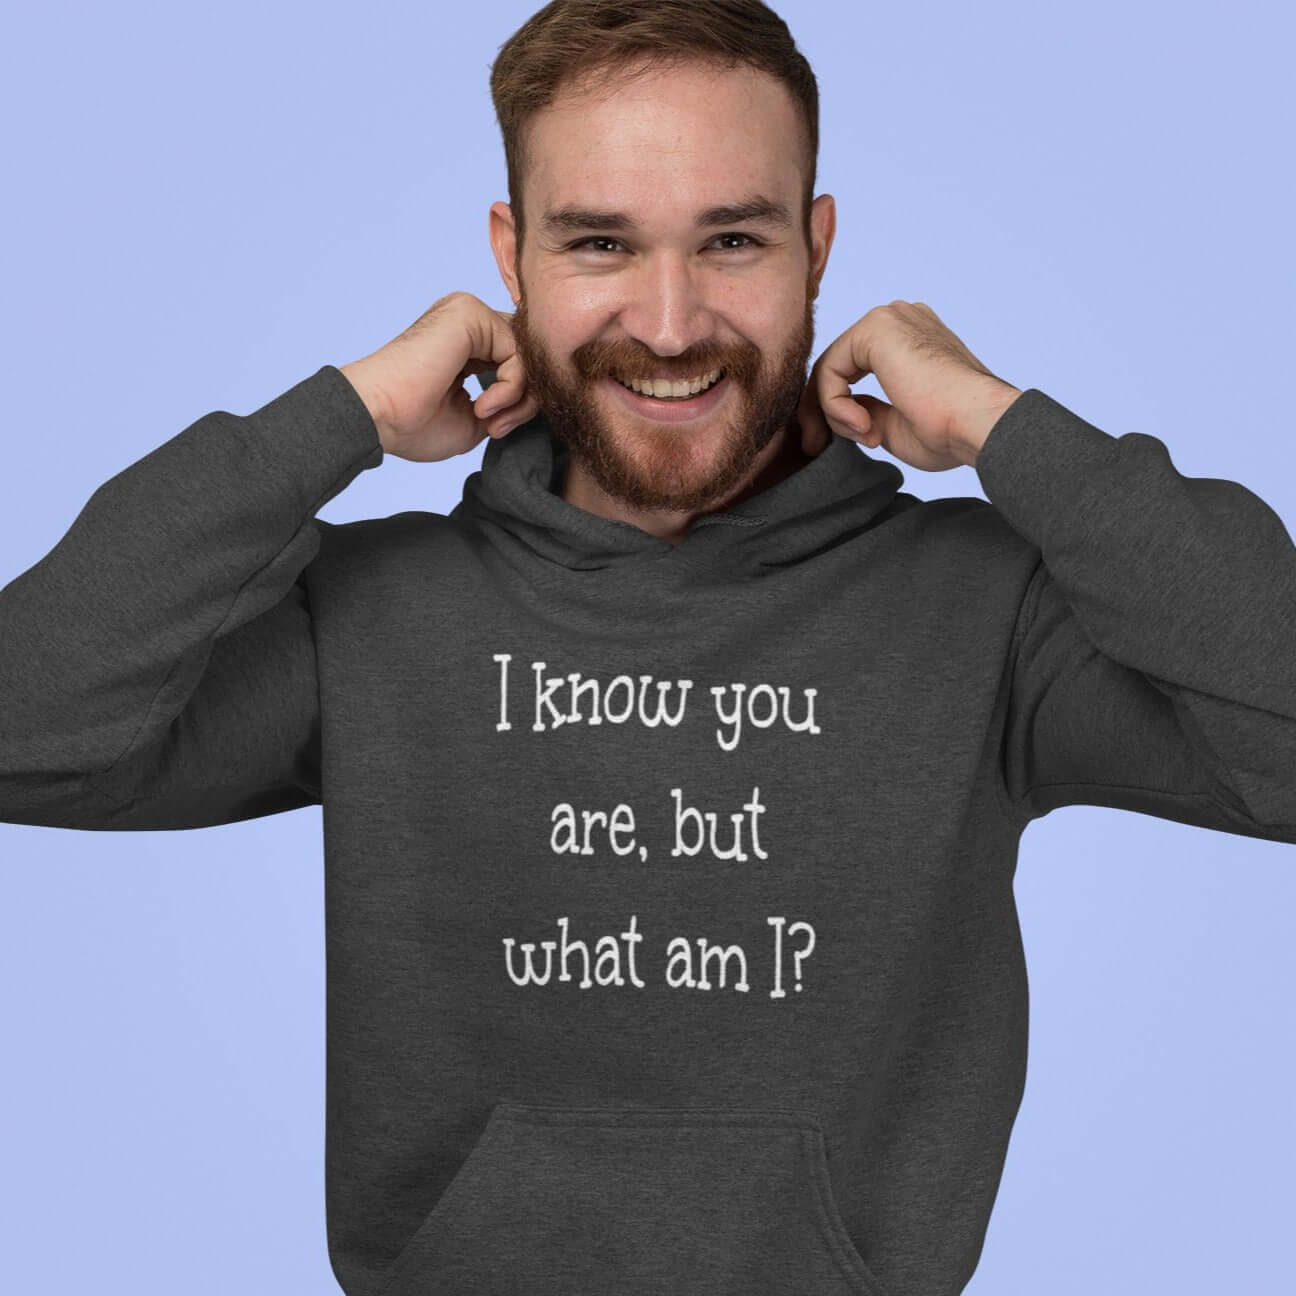 Man wearing dark heather grey hoodie sweatshirt with the childish phrase I know you are but what am I with a question mark printed on the front.